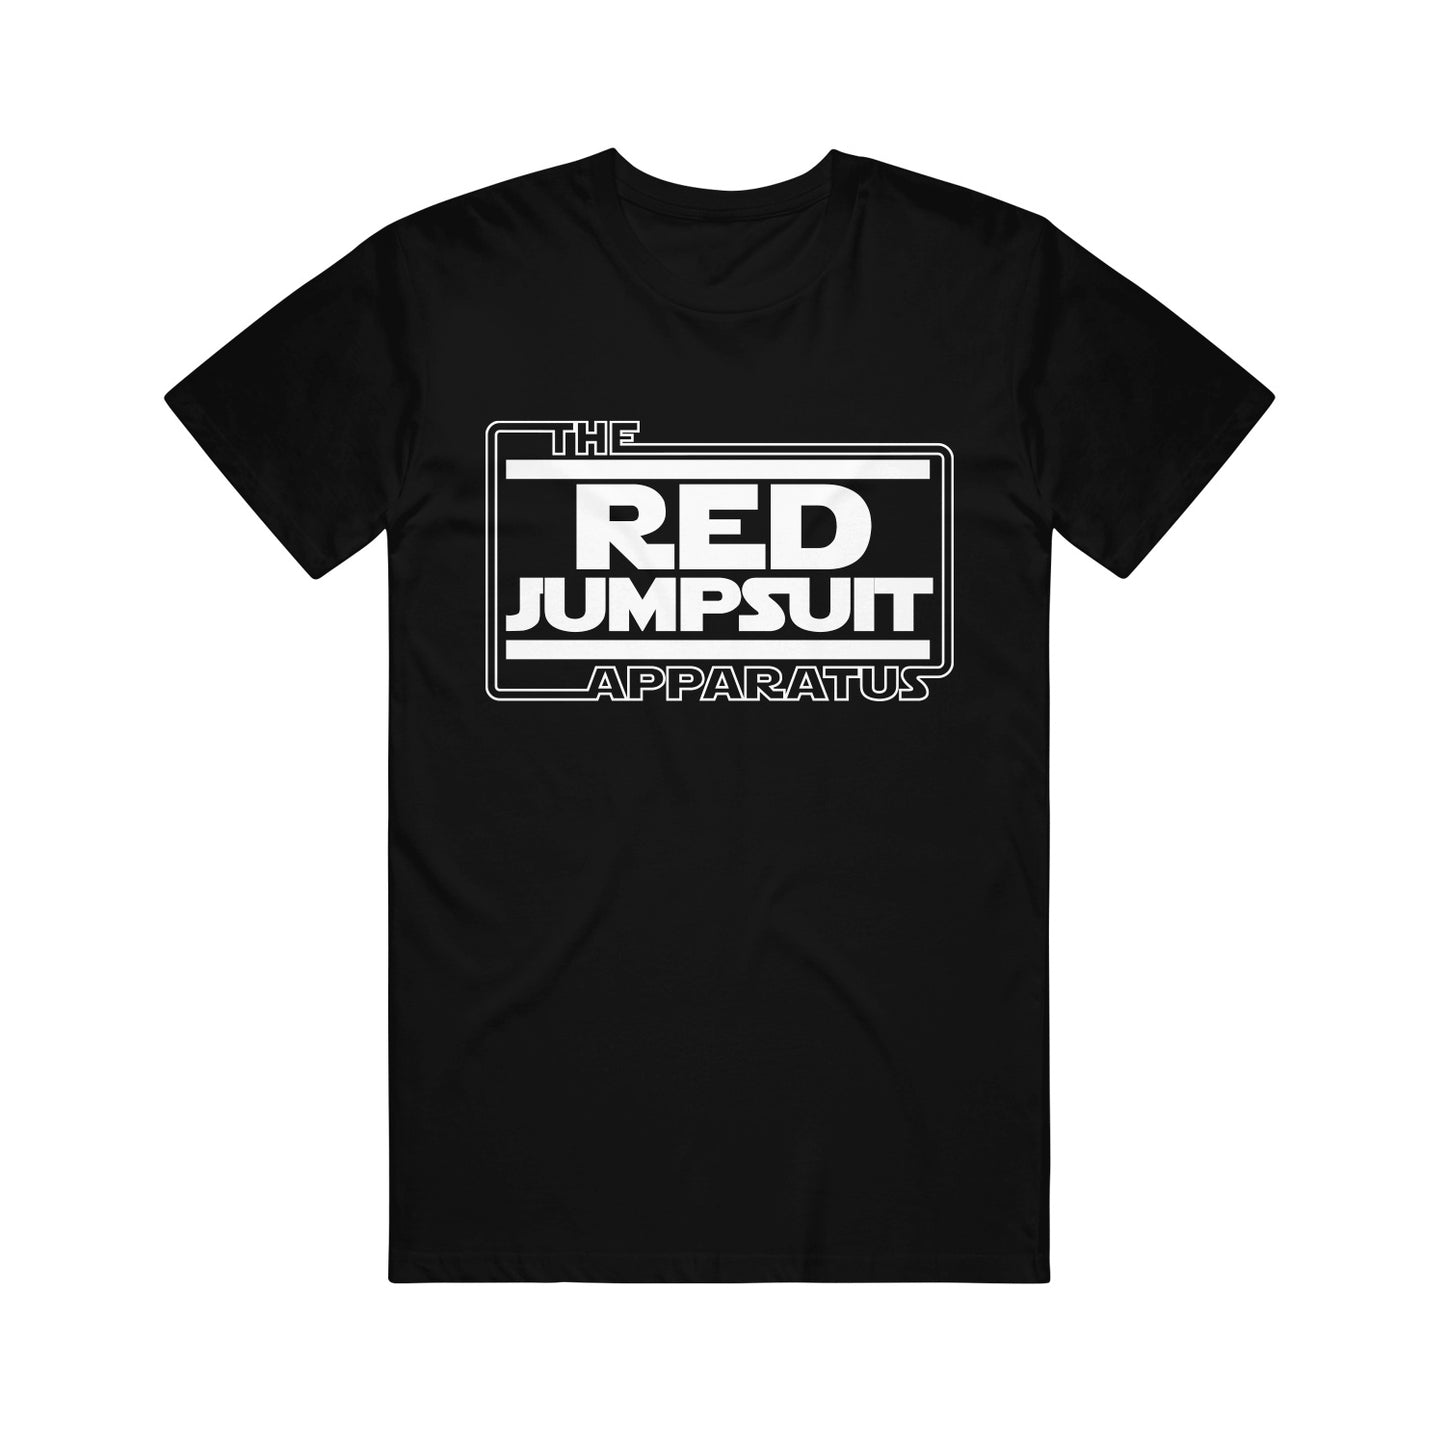 image of a black tee shirt on a white background. tee has a full chest print in white that says the red jumpsuit apparatus in a stars wars font style